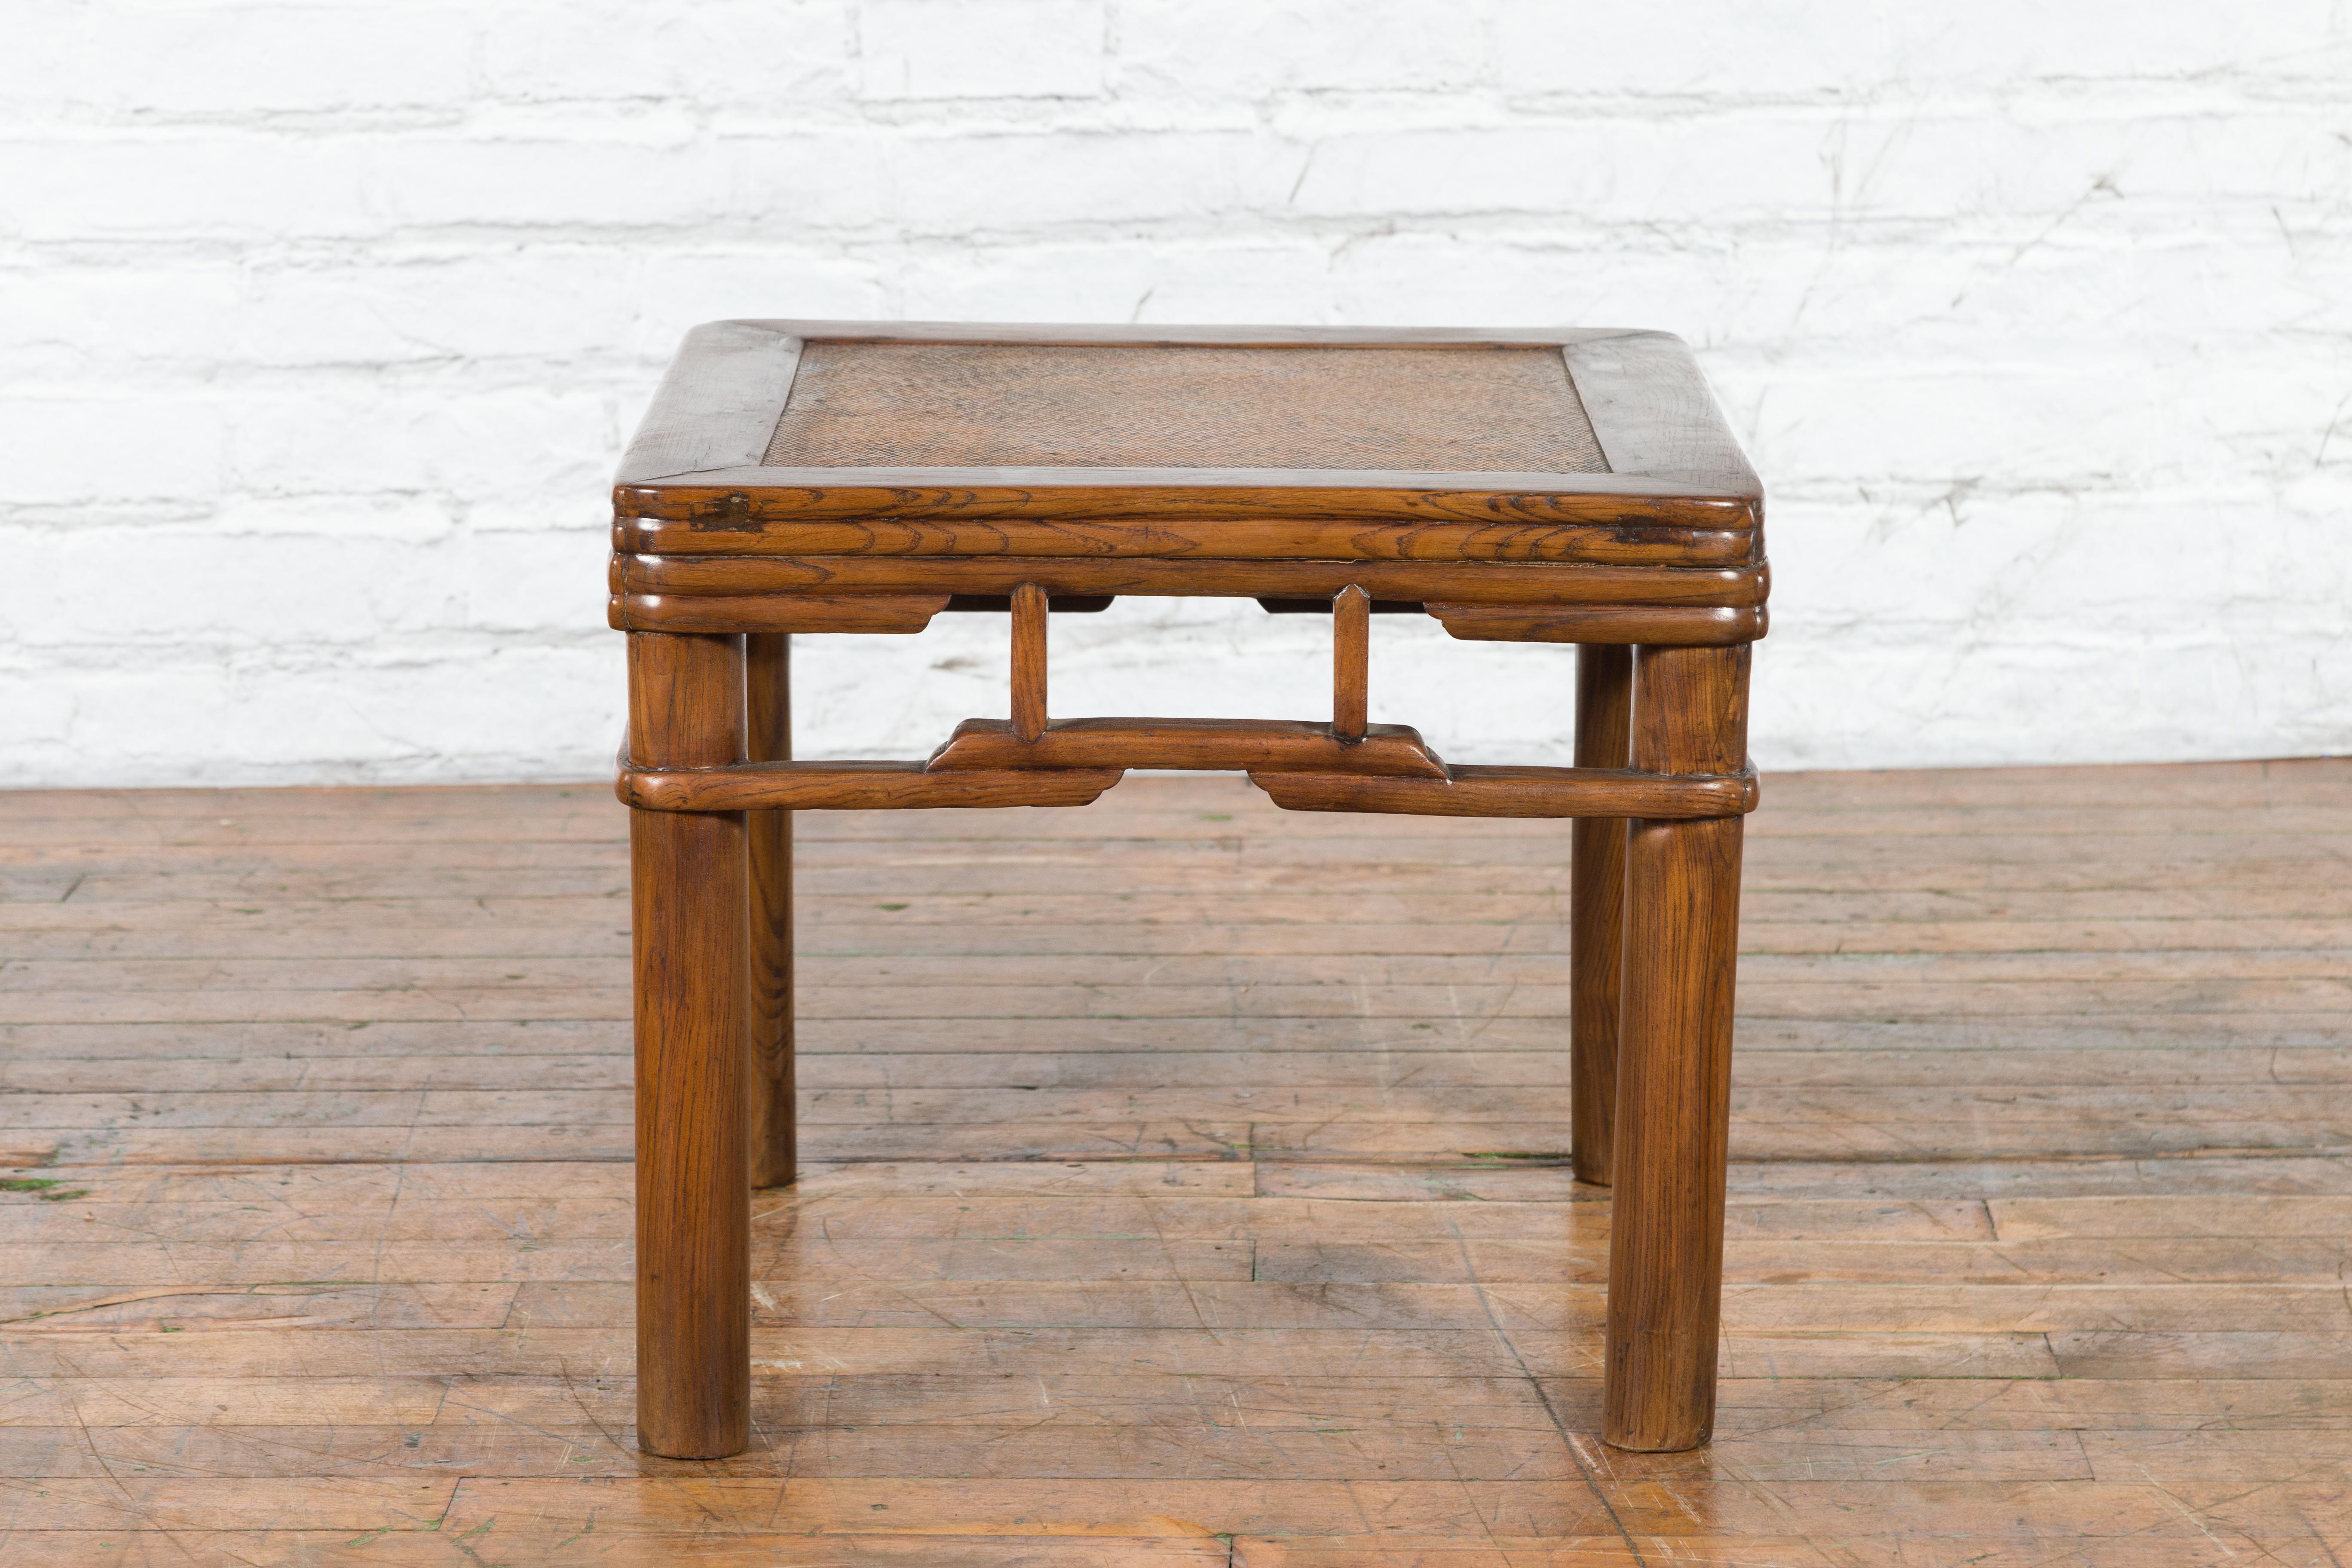 A Chinese Qing Dynasty period elm wood side table from the early 20th century with woven rattan top inset, reeded apron, and pillar strut motifs. Created in China during the Qing Dynasty period in the early years of the 20th century, this elm wood